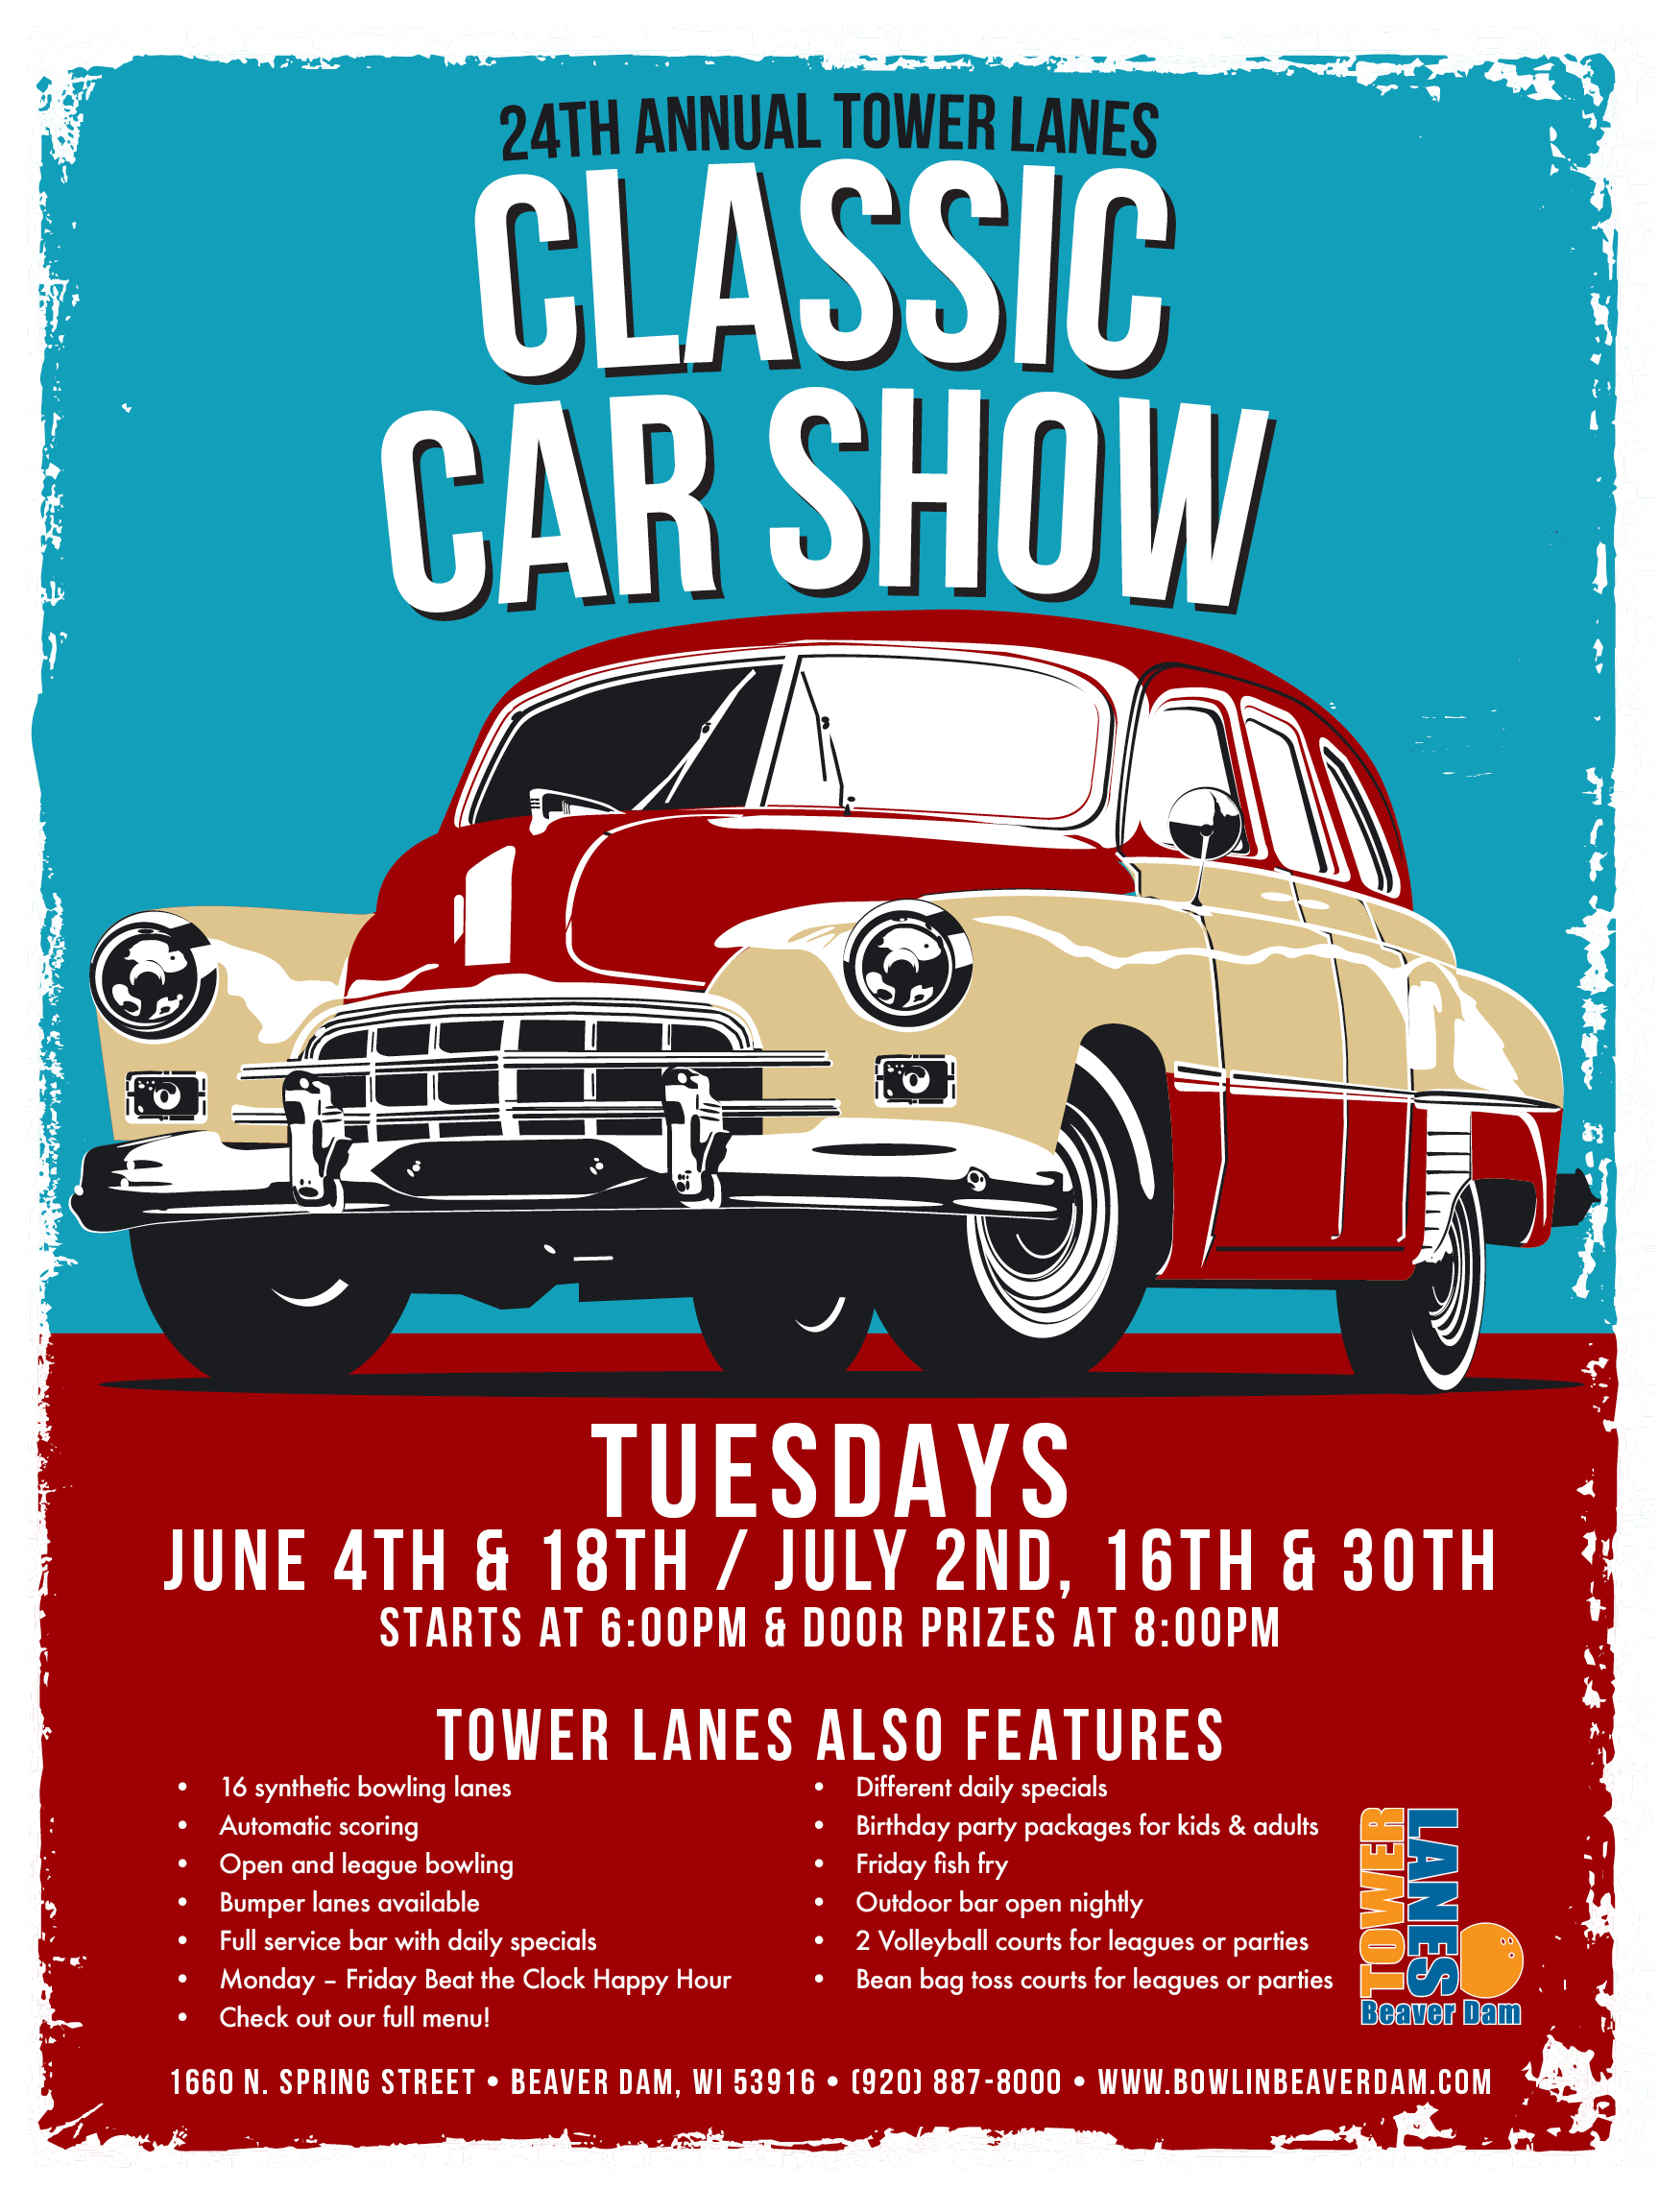 Classic Car Show at Tower Lanes